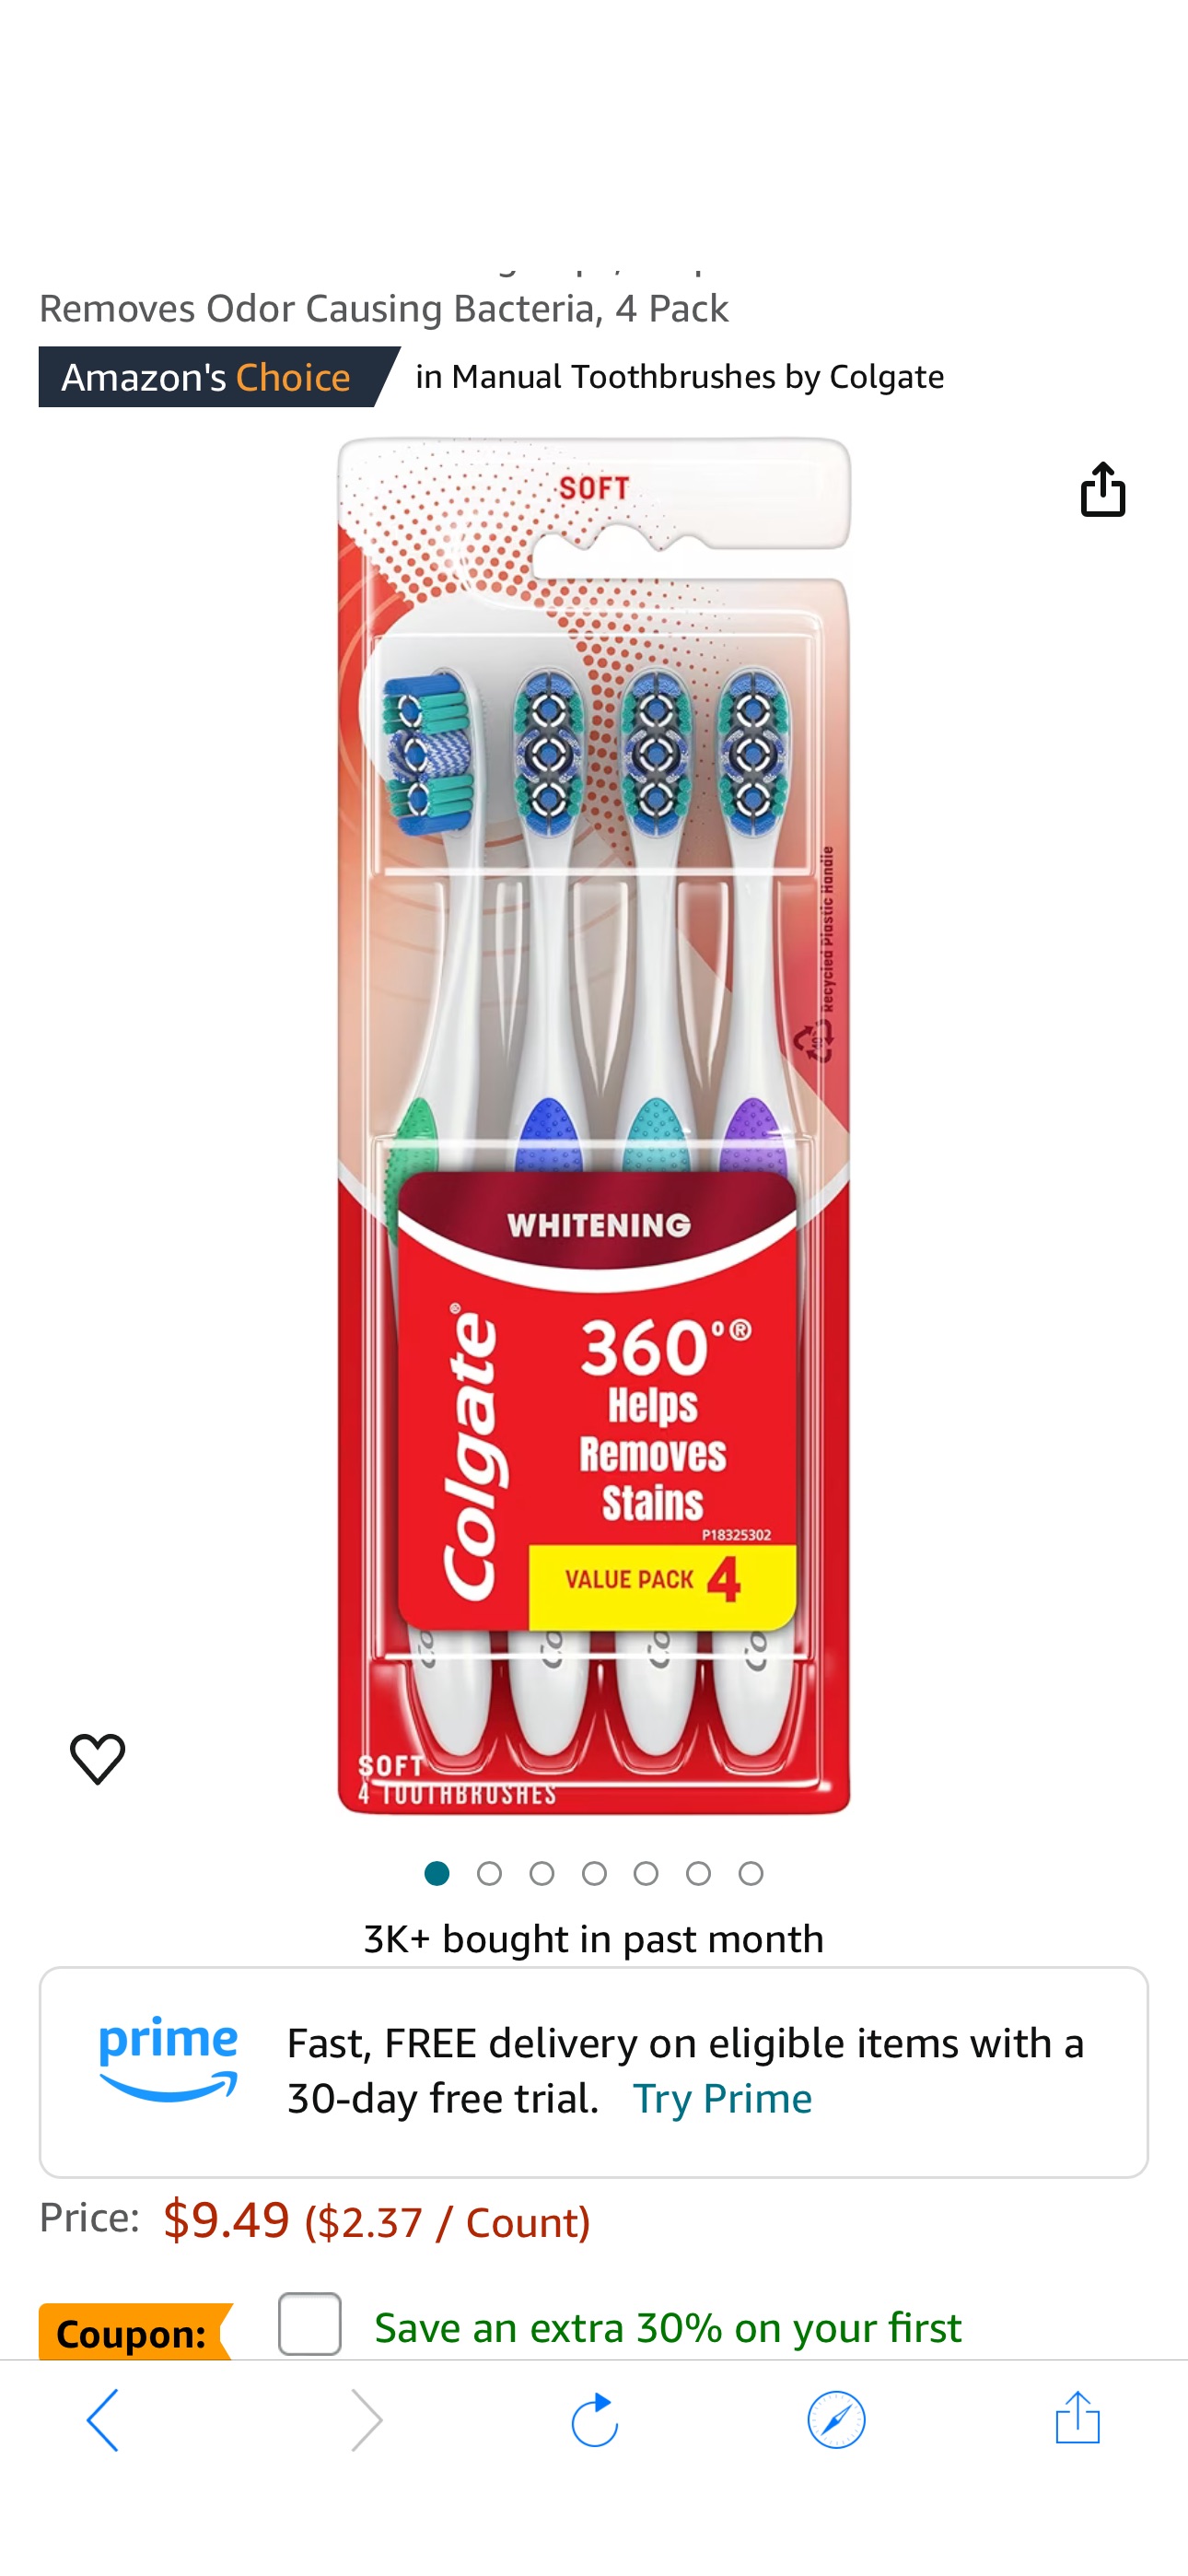 Amazon.com : Colgate 360 Optic White Whitening Toothbrush, Adult Soft Toothbrush with Whitening Cups, Helps Whiten Teeth and Removes Odor Causing Bacteria, 4 Pack : Health & Household